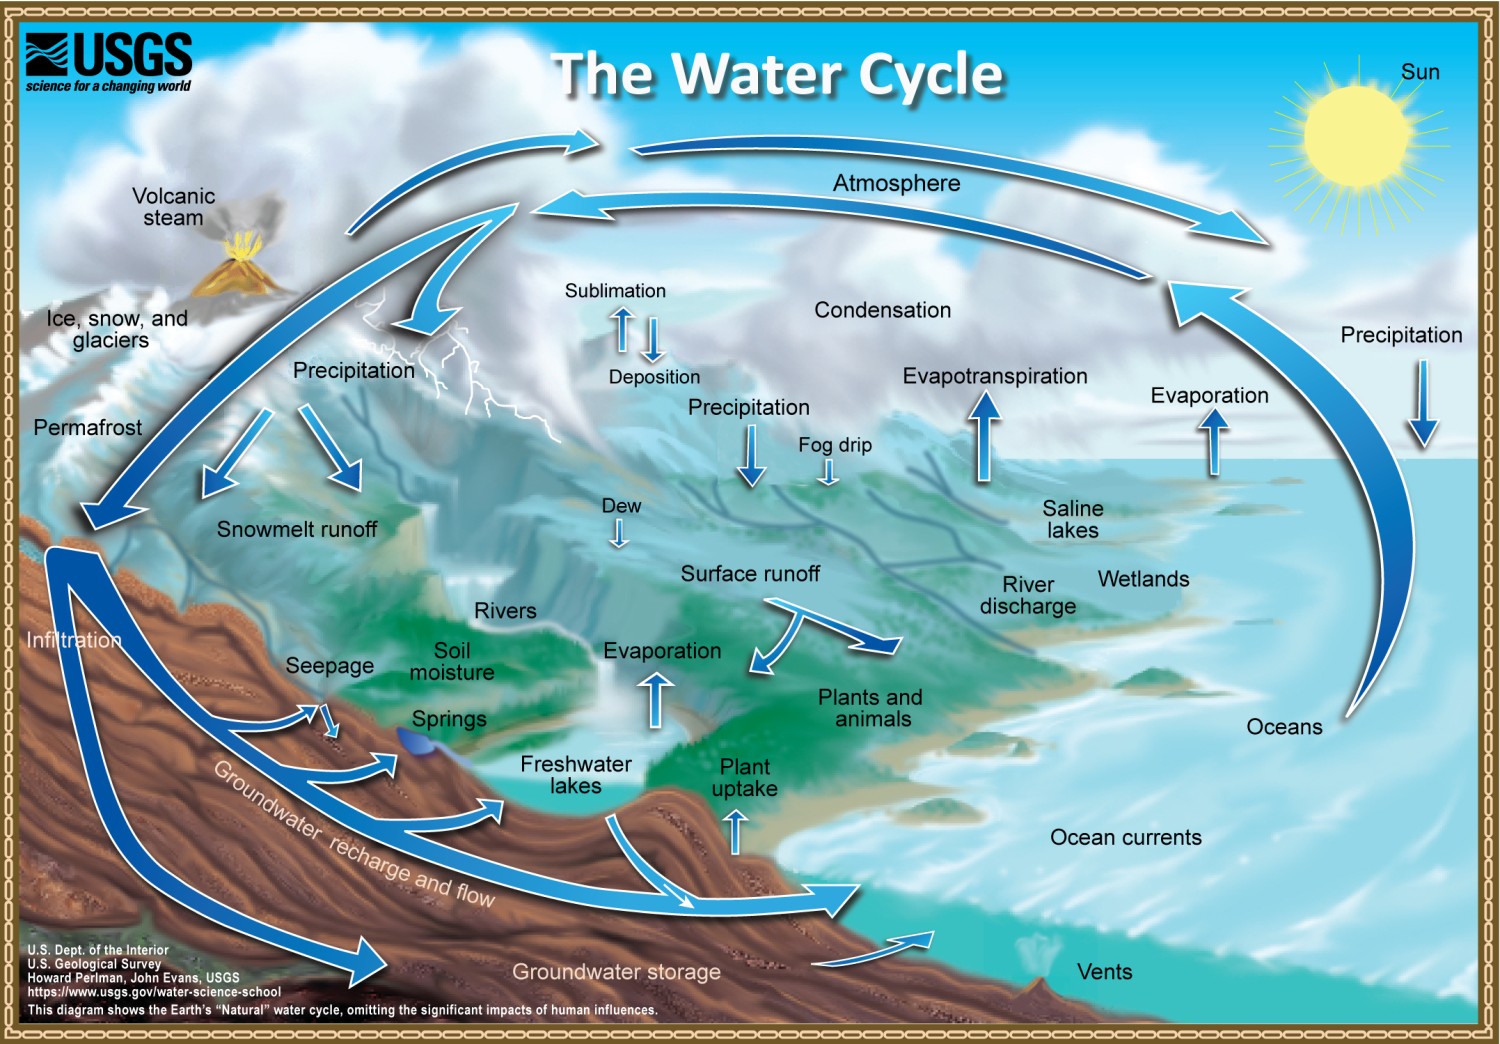 Figure 1.1: A typical representation of the natural water cycle, published by the US Geological Survey.